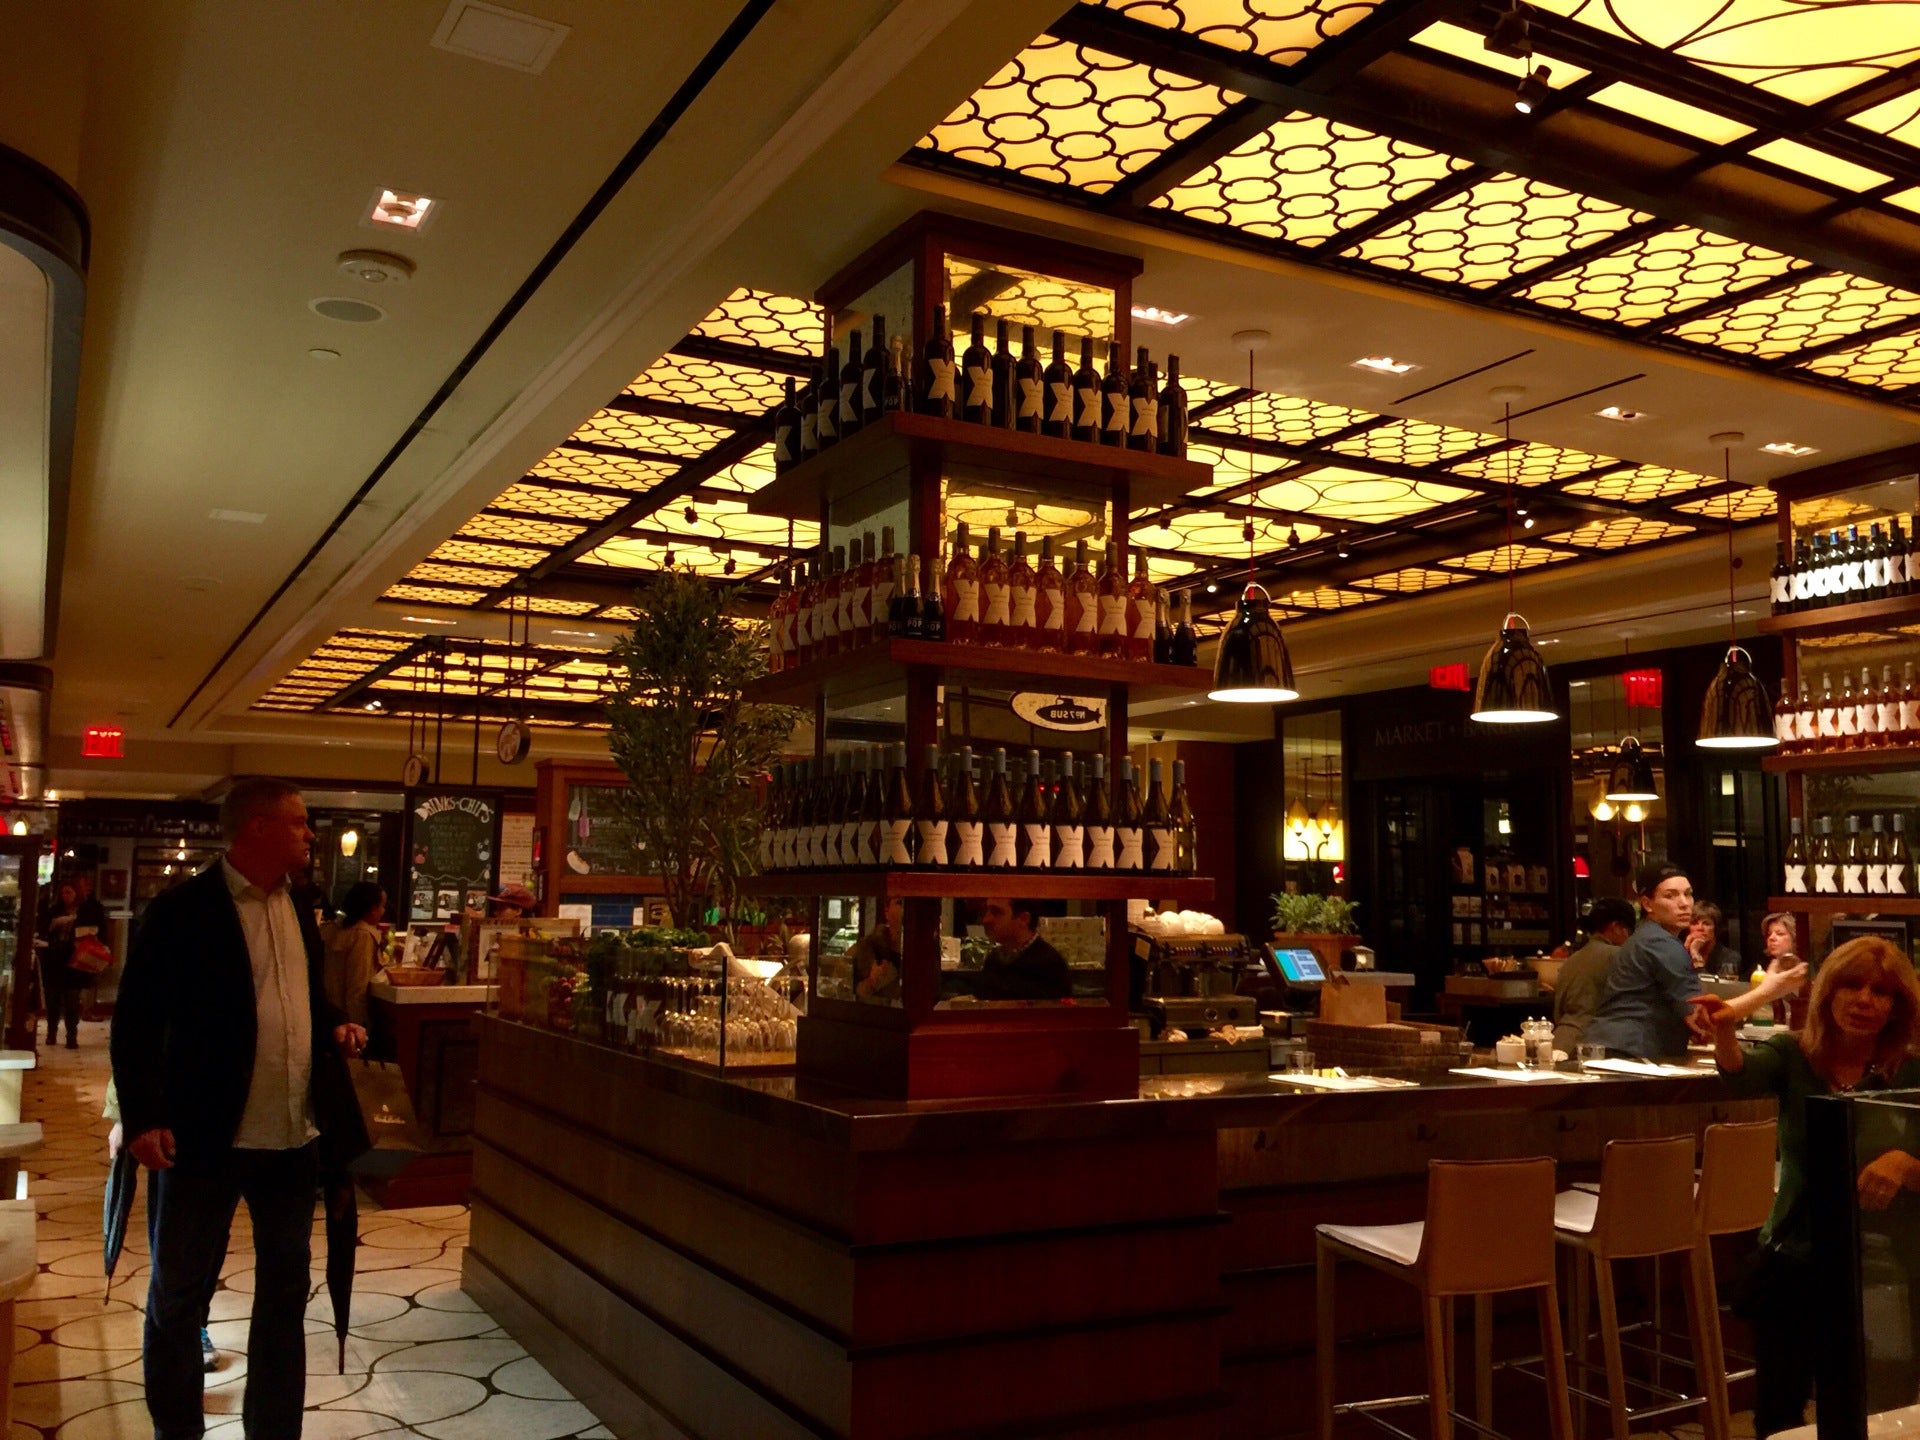 The Plaza Food Hall at 1 W 59th St (at 5th Ave) New York, NY - The